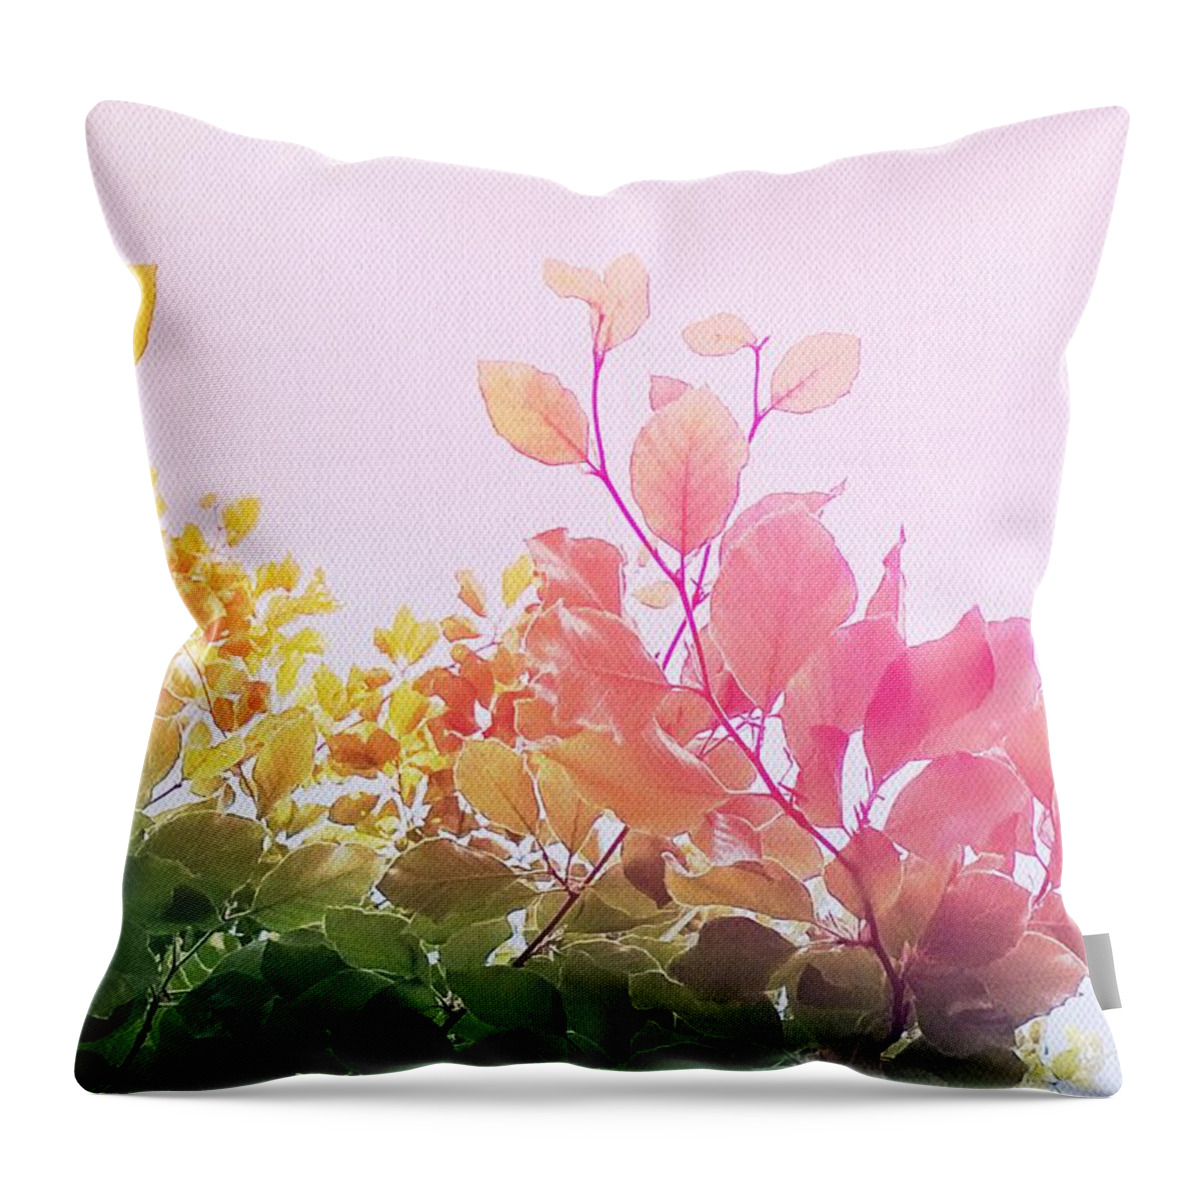 Pastel Throw Pillow featuring the digital art Pastel Leaves on canvas by Itsonlythemoon -